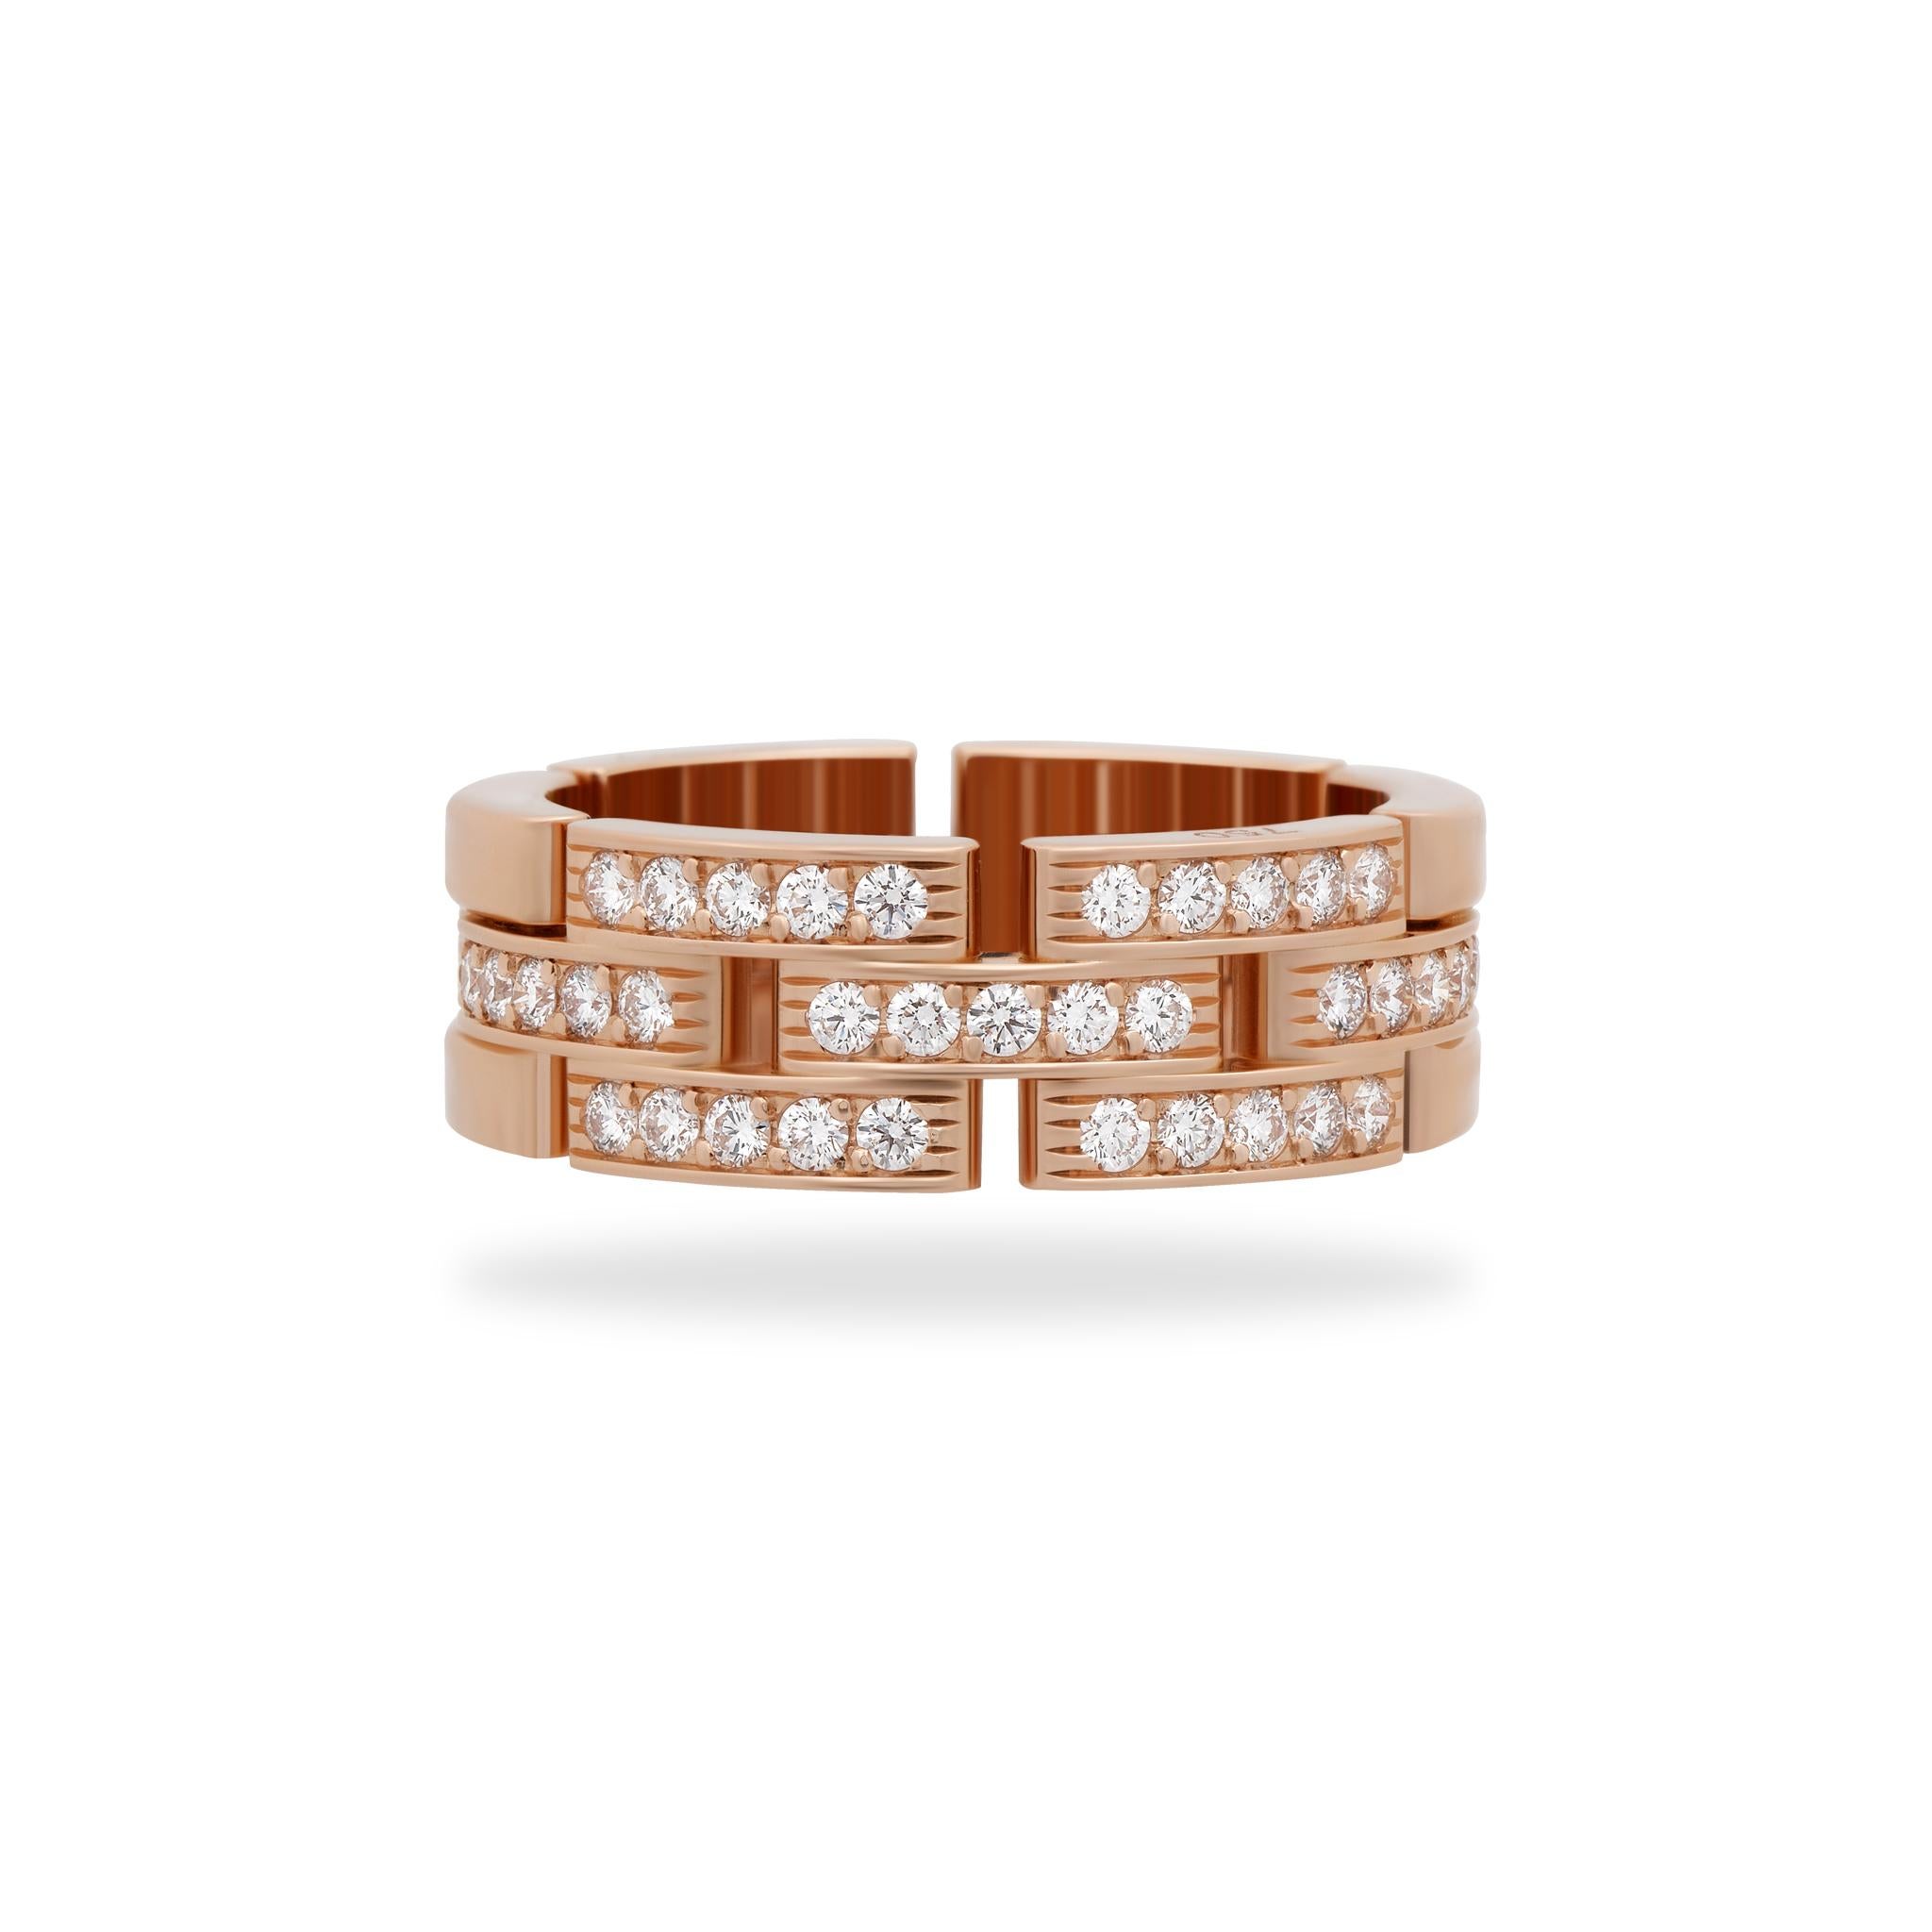 METAL TYPE: 18K Rose Gold
STONE WEIGHT: 0.53ct twd
TOTAL WEIGHT: 13.3g
RING SIZE: 9
REFERENCE #: 20806-LSOB
CONDITION: Pre-owned, Excellent condition.